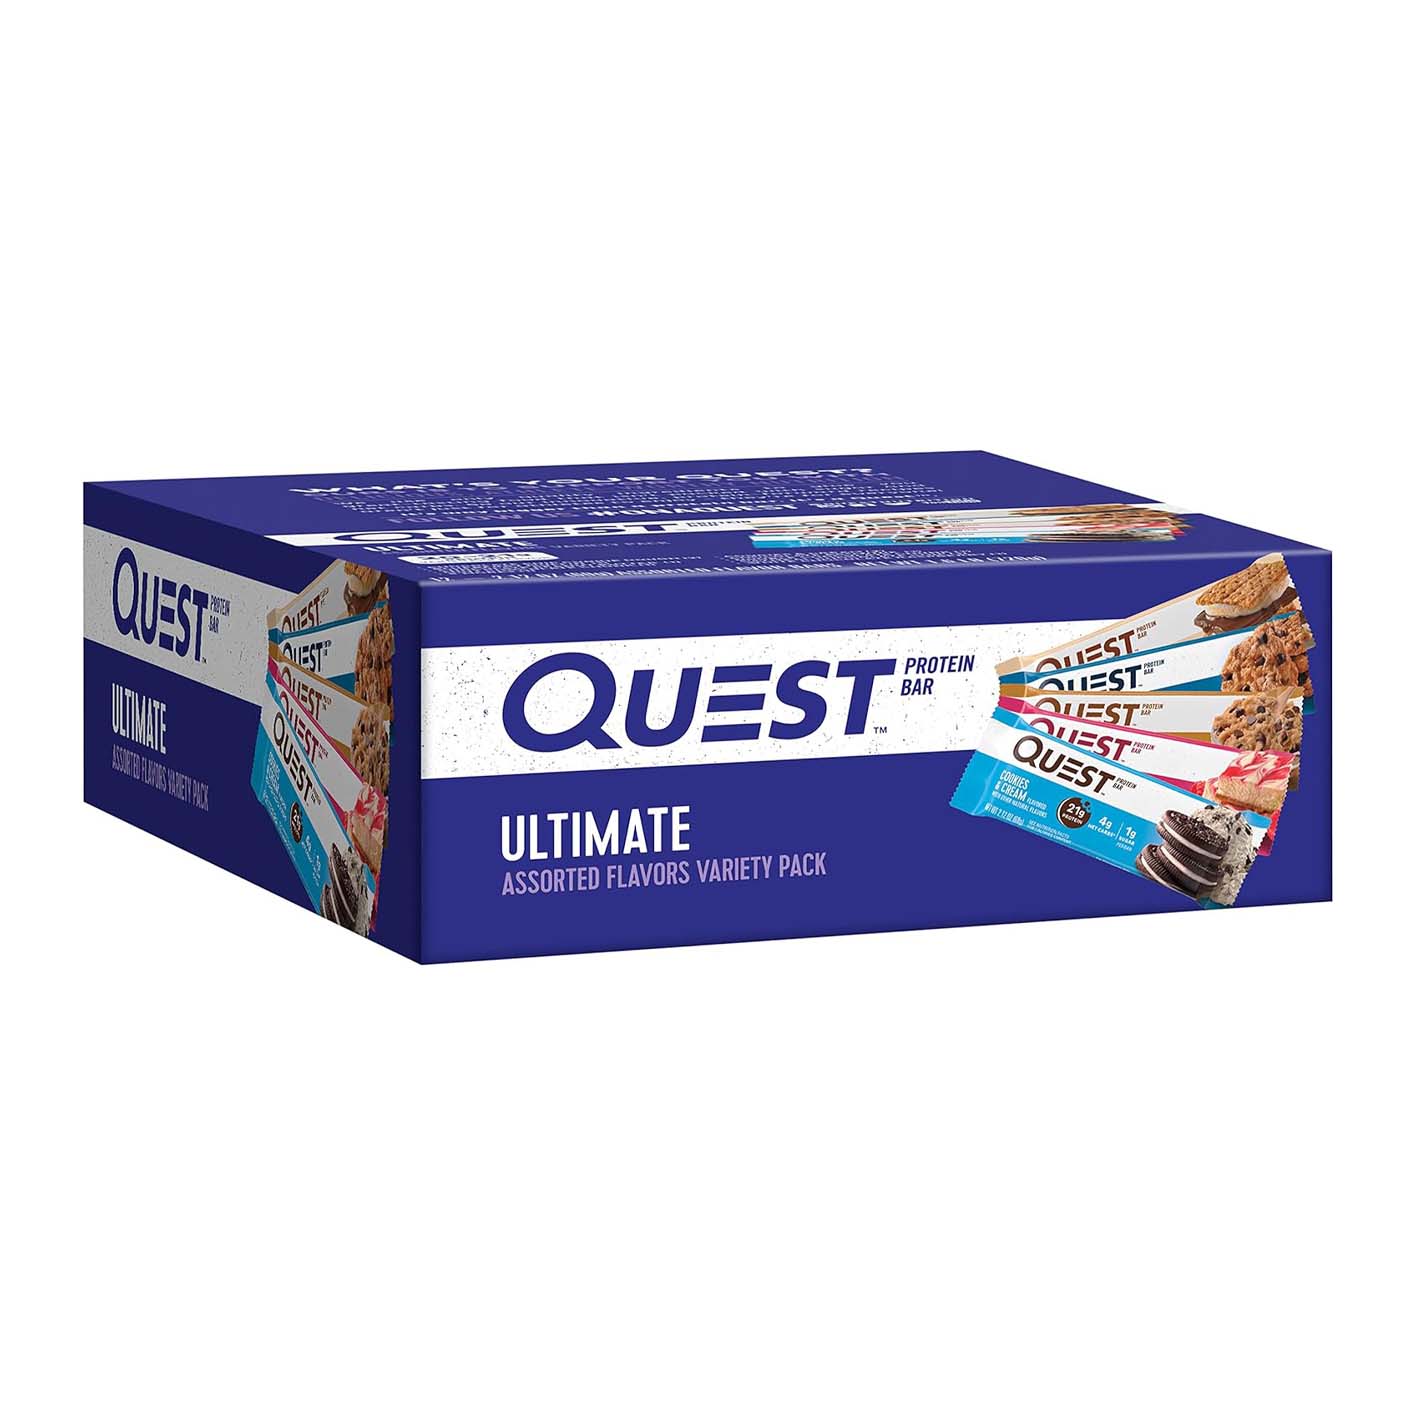 Quest Nutrition Ultimate Variety Pack Protein Bars in a blue box 